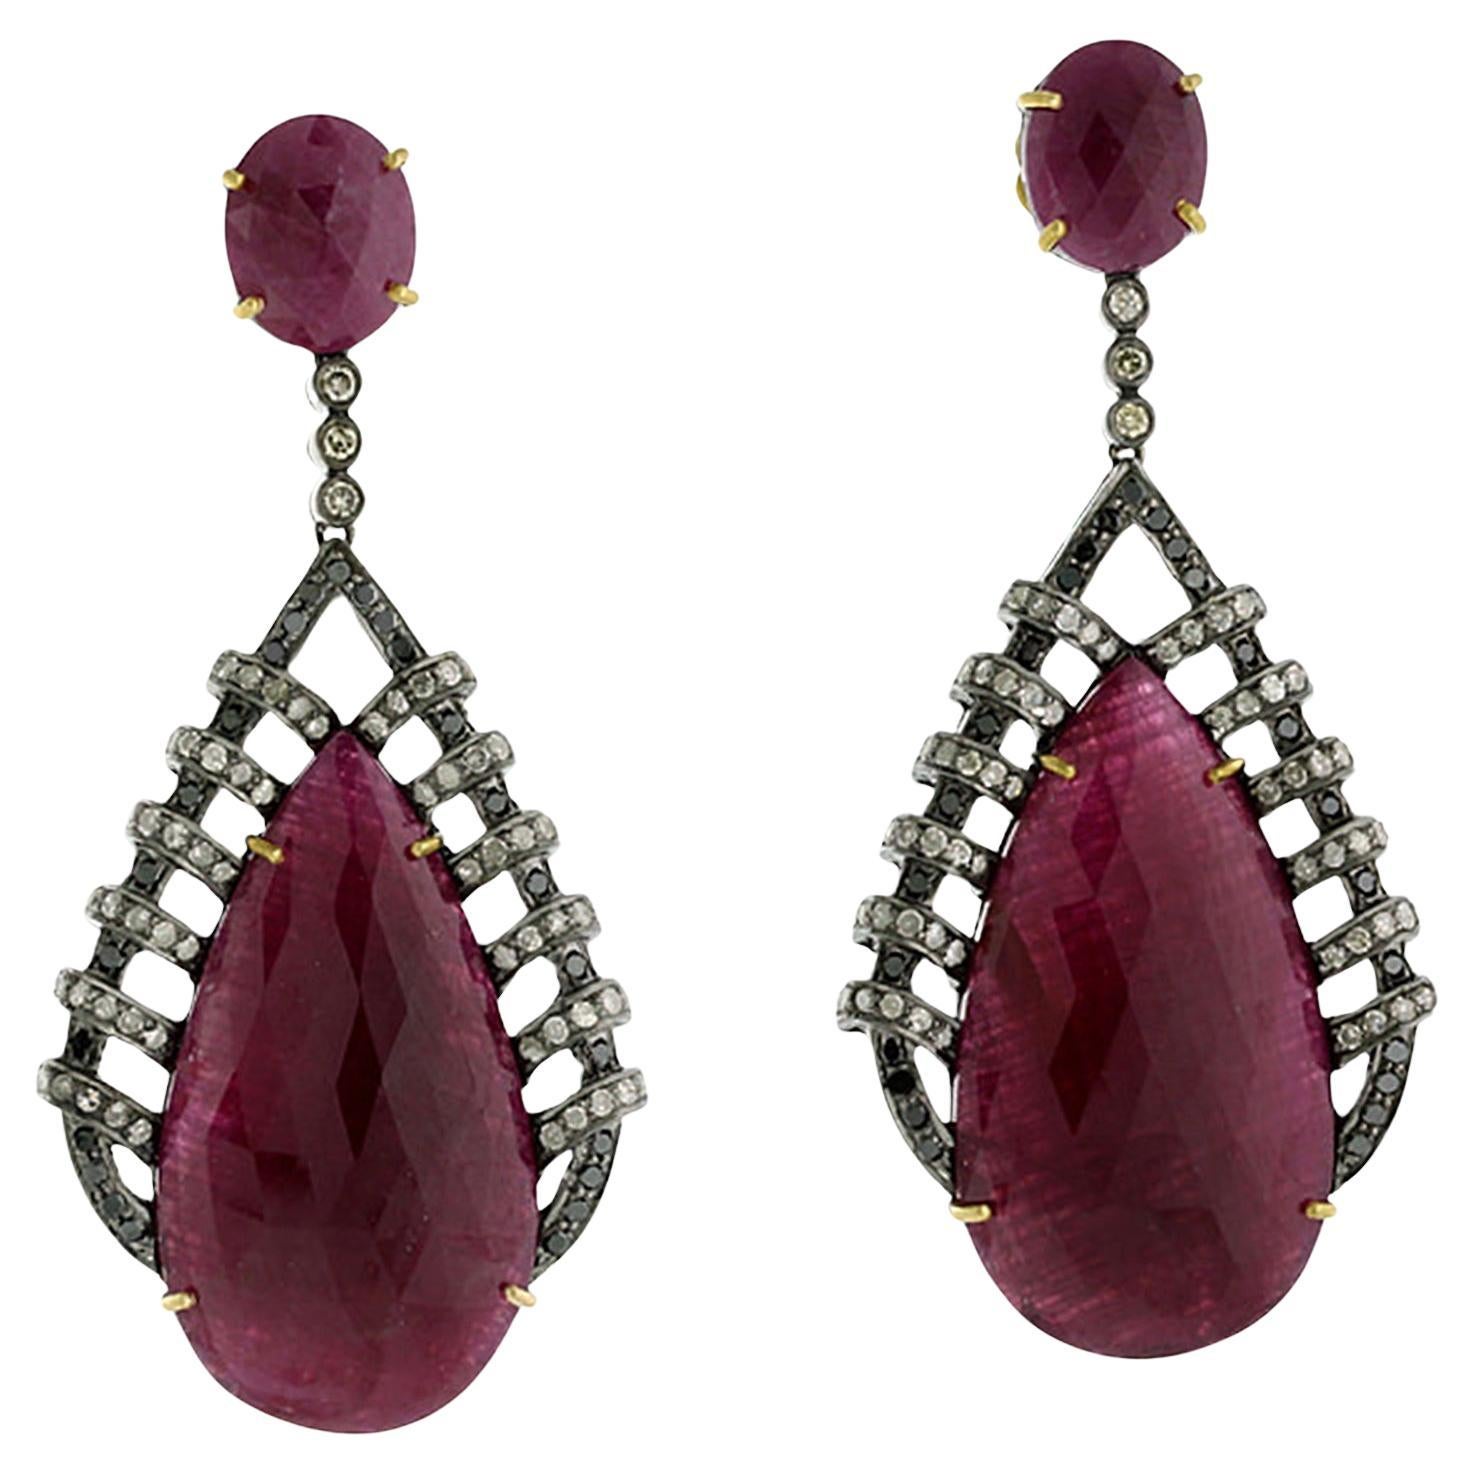 Mosambic Ruby Dangle Earrings Caged In Diamonds Made In 18k Yellow gold